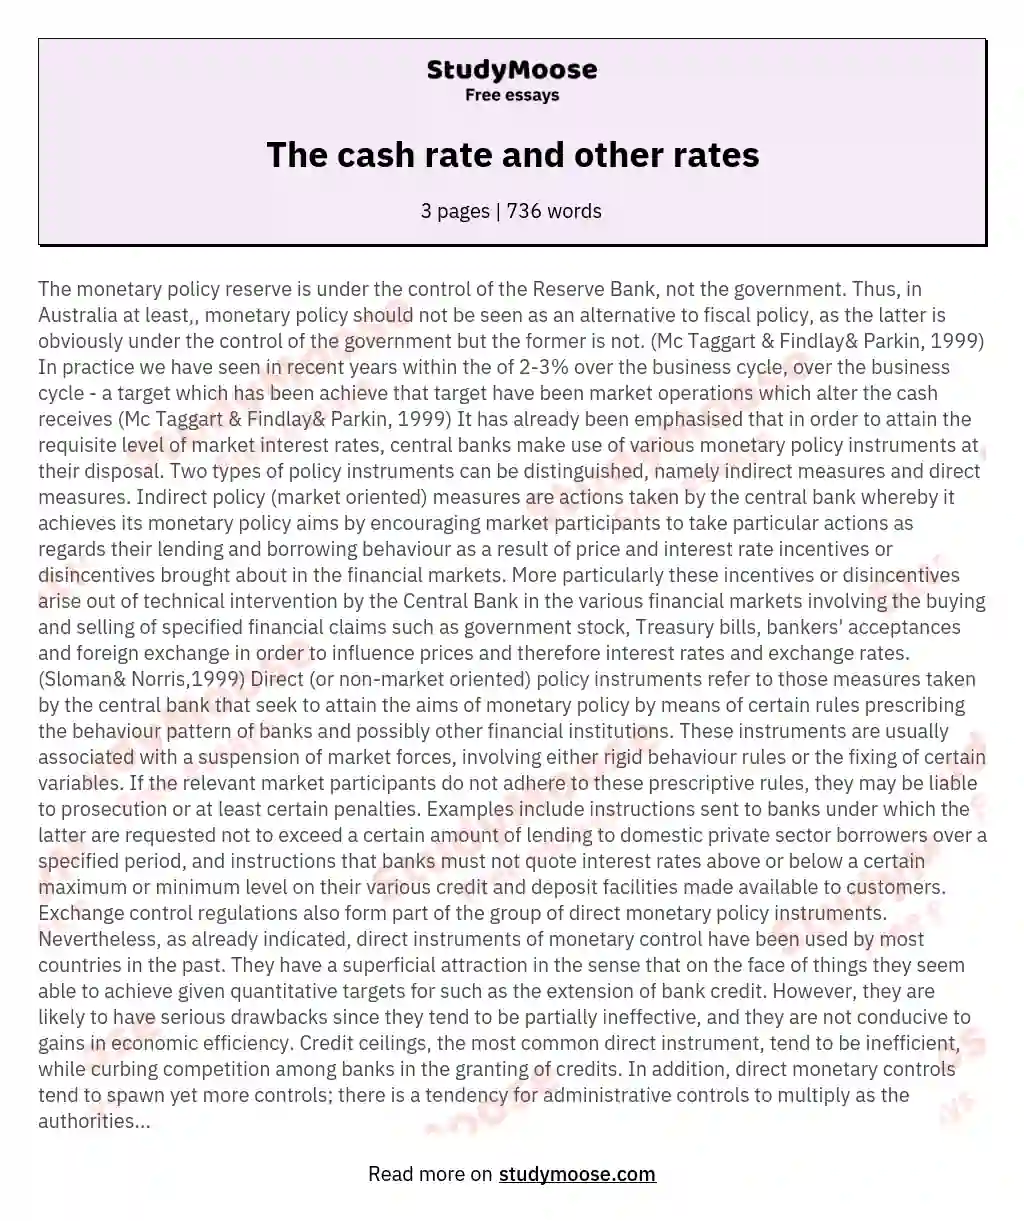 The cash rate and other rates